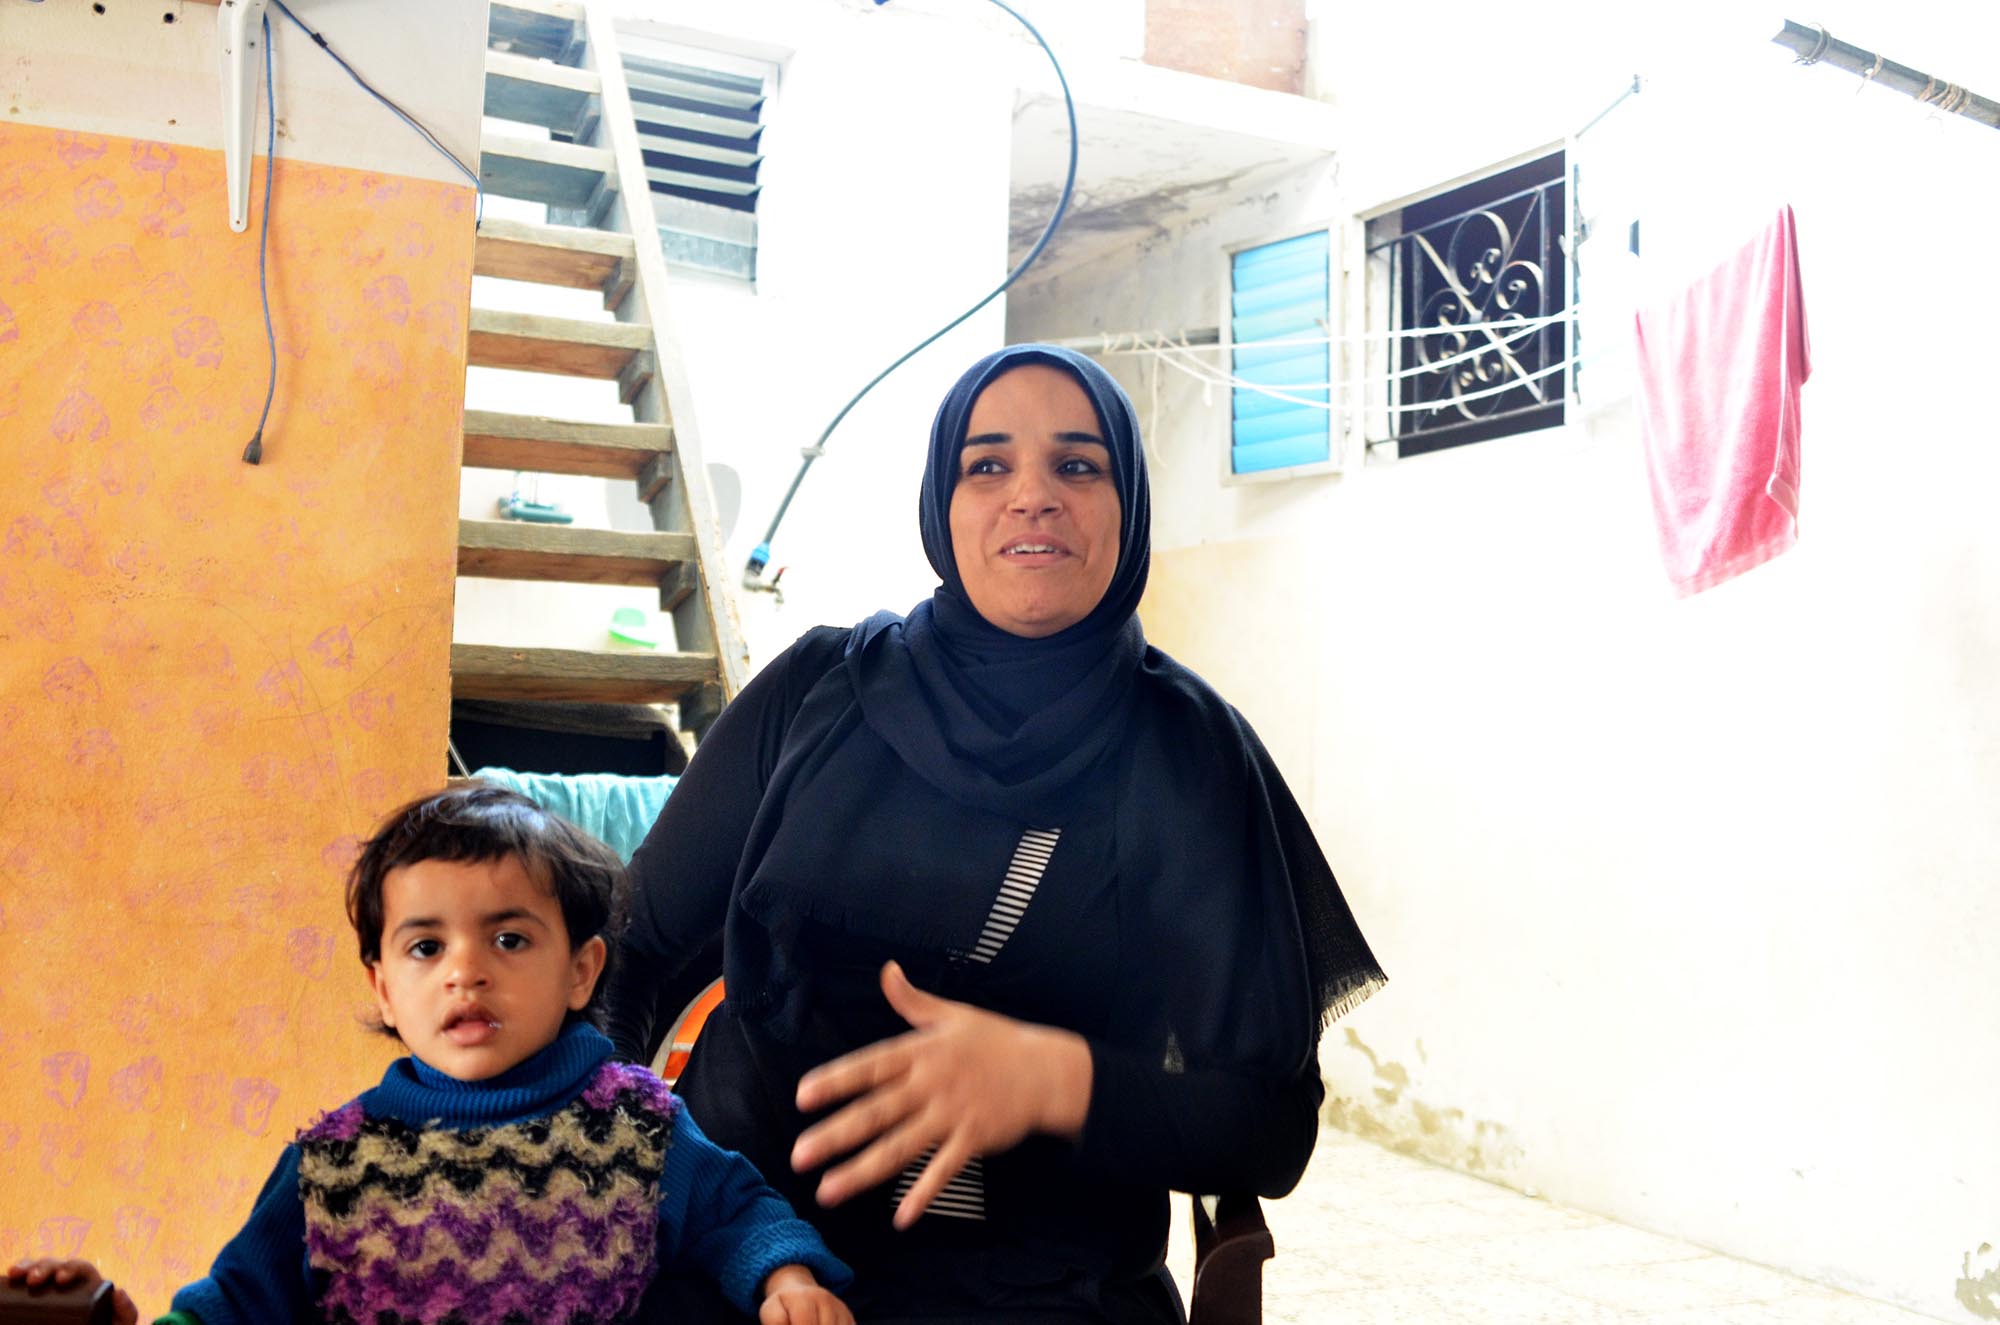 Ahlam, a mother of 5 who has lived in Beit Hanoun for seven years.